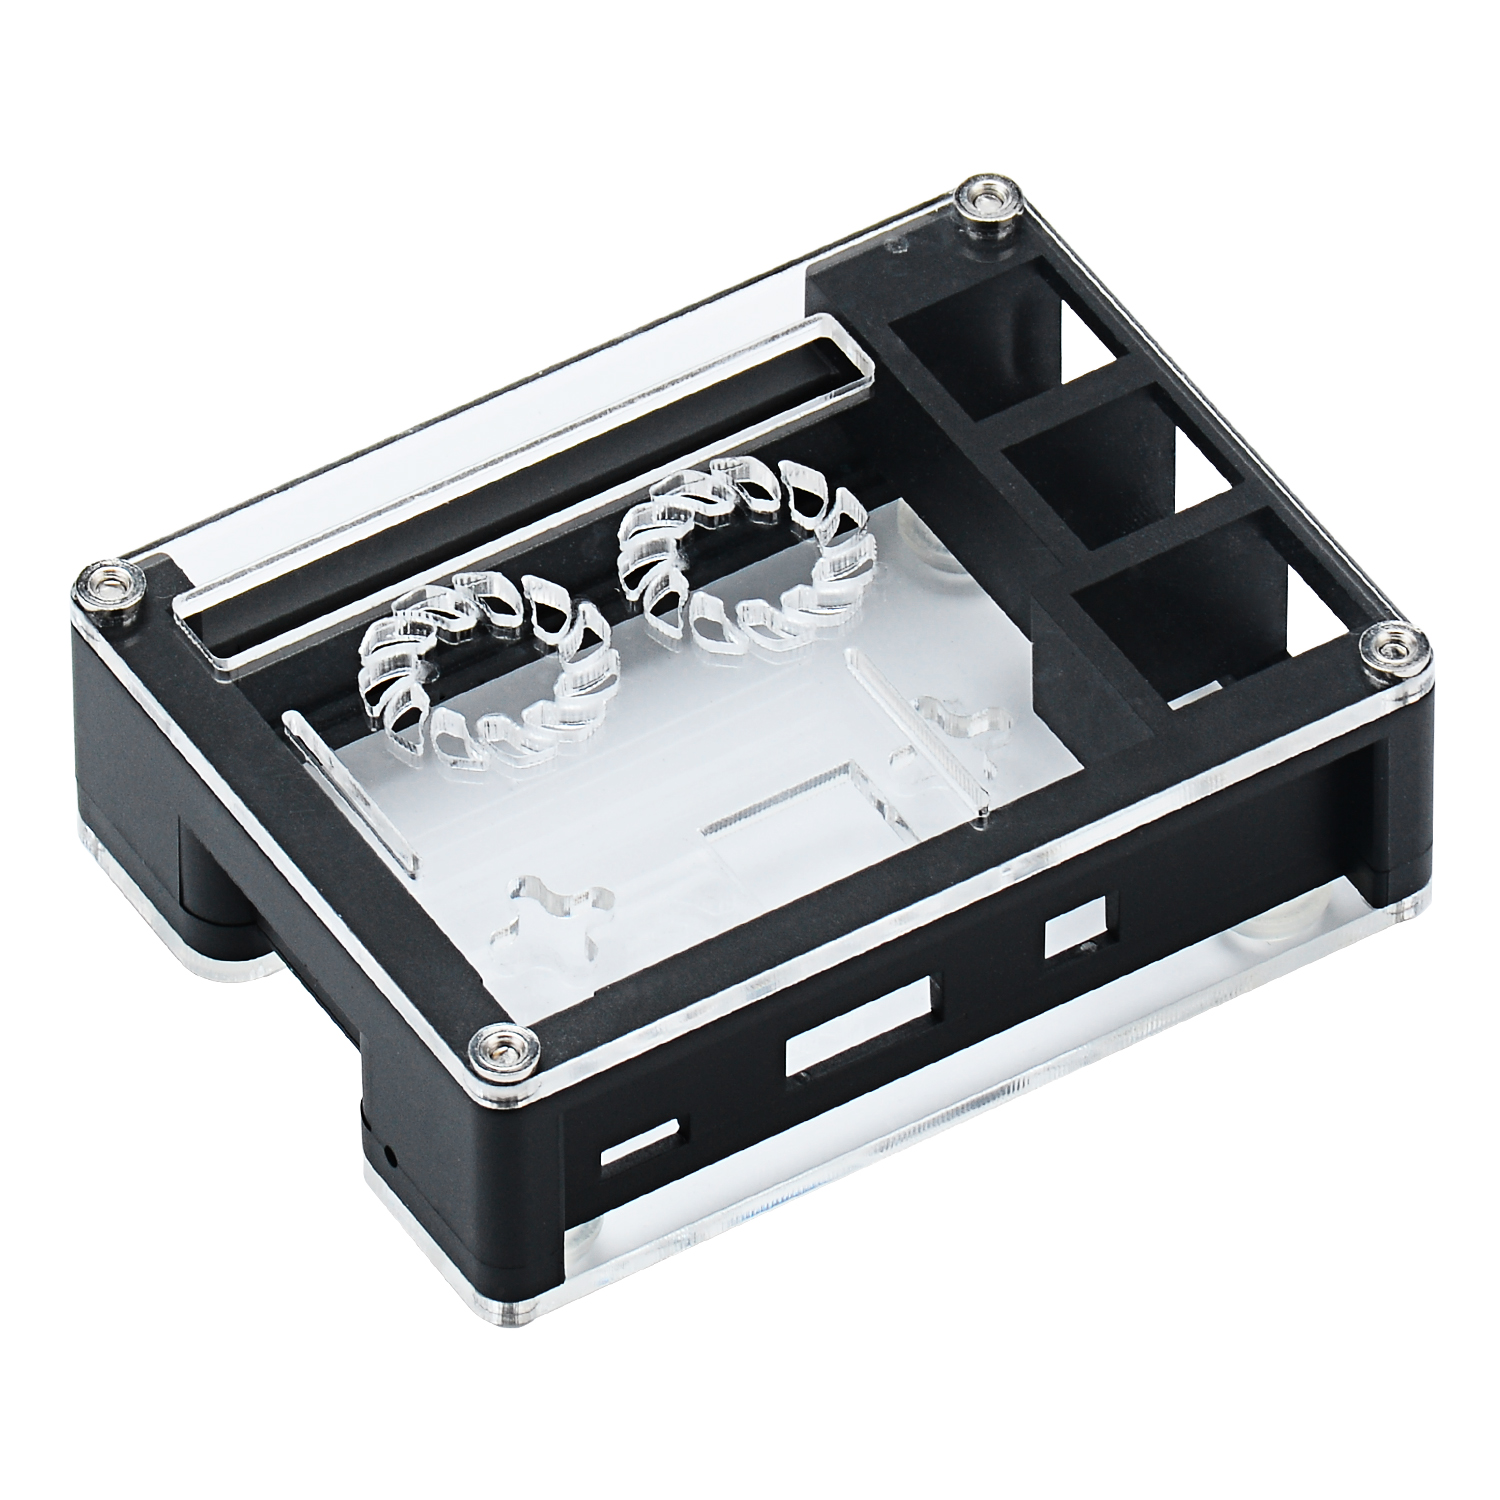 Black-Acrylic-Case-Support-Dual-Cooling-Fans-For-Raspberry-Pi-3B-Board-1411938-9